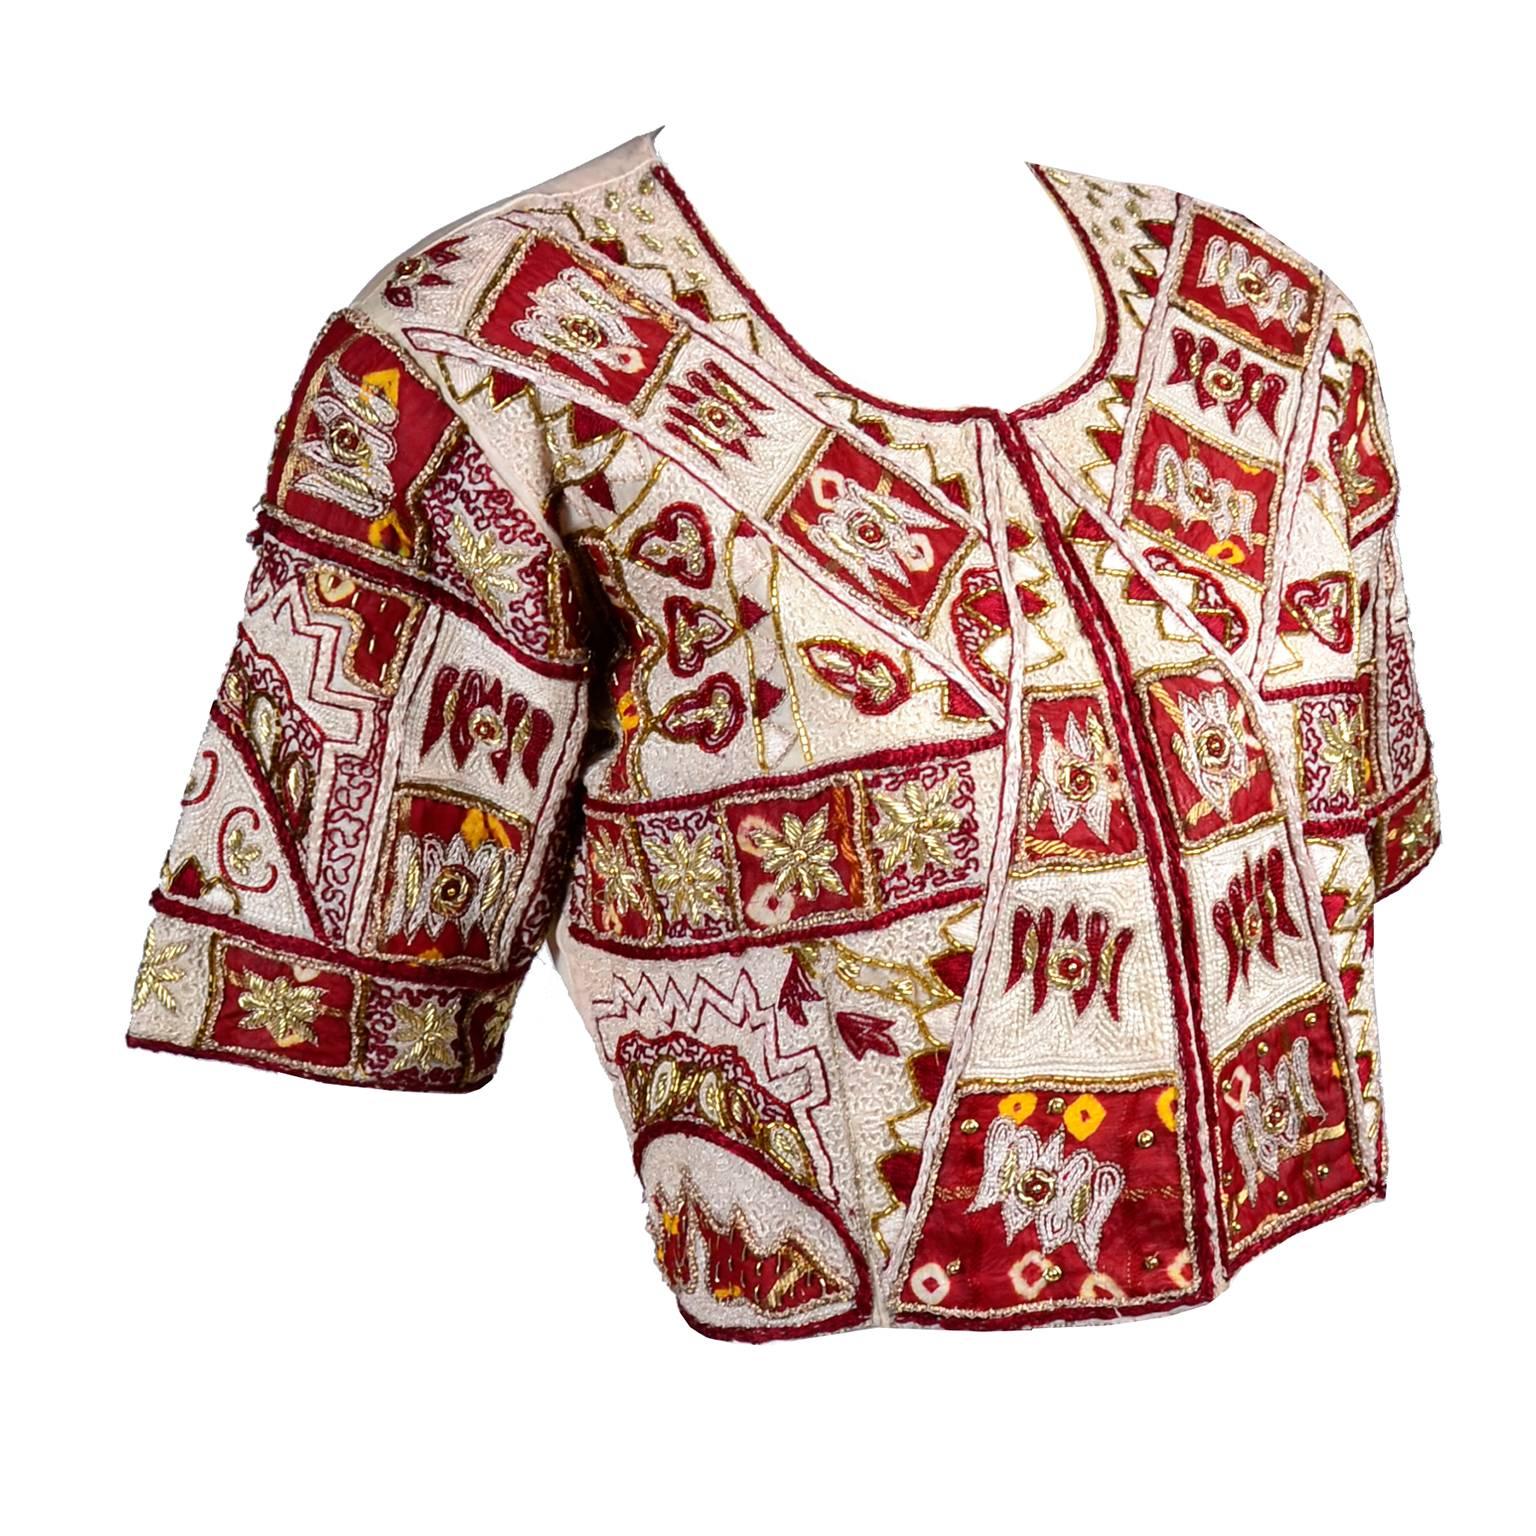 Vintage Choli or Saree Blouse in Maroon and Ivory Silk Gold Metallic Embroidery 